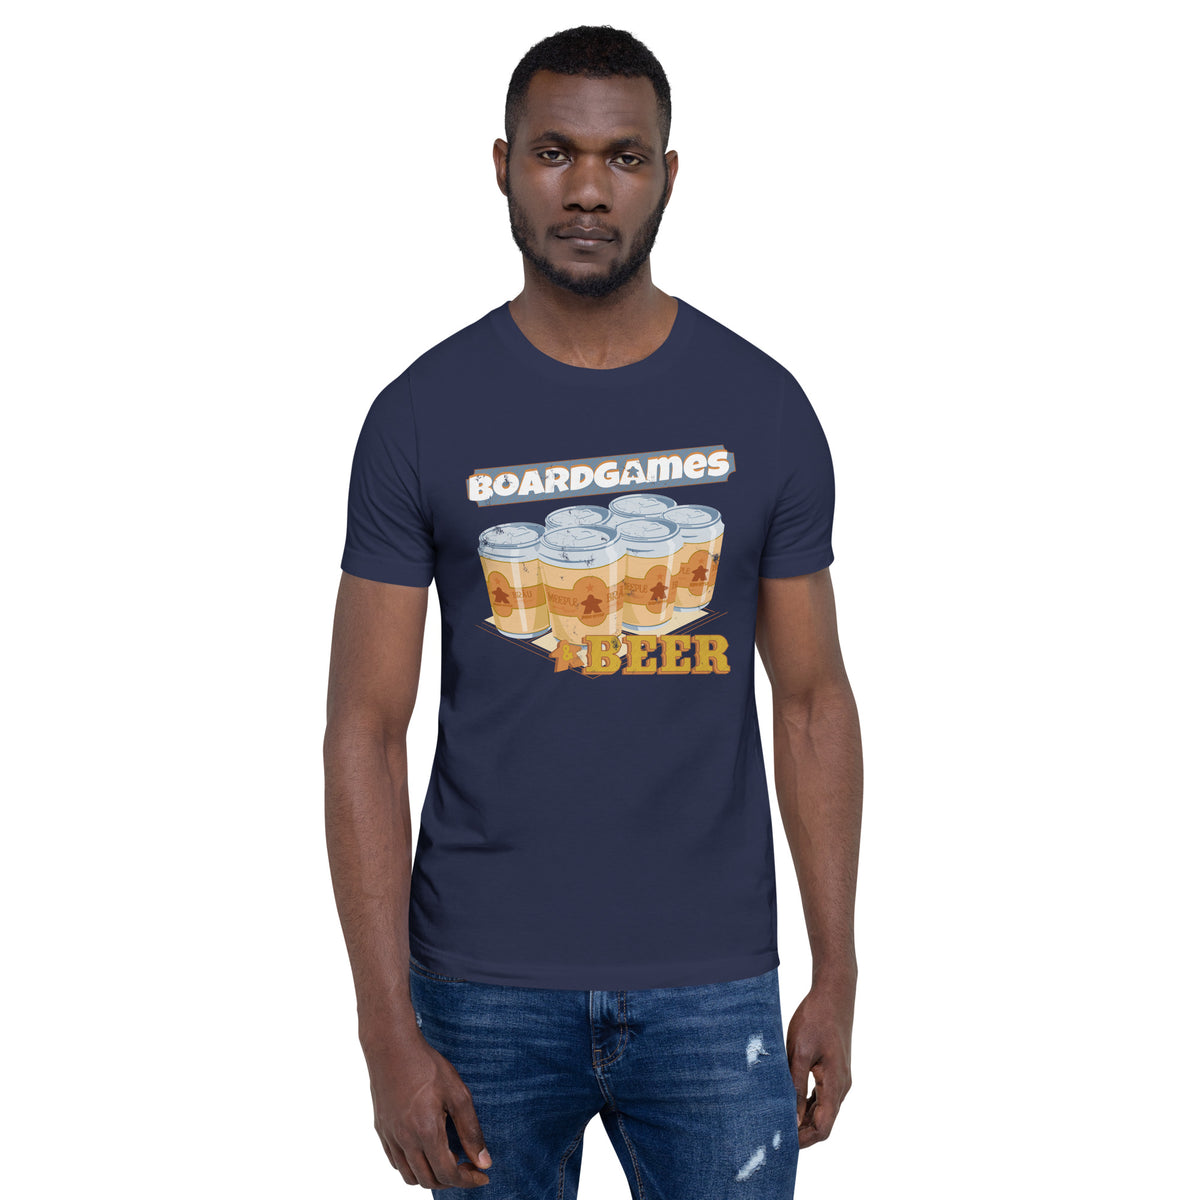 Boardgames and Beer T-Shirt